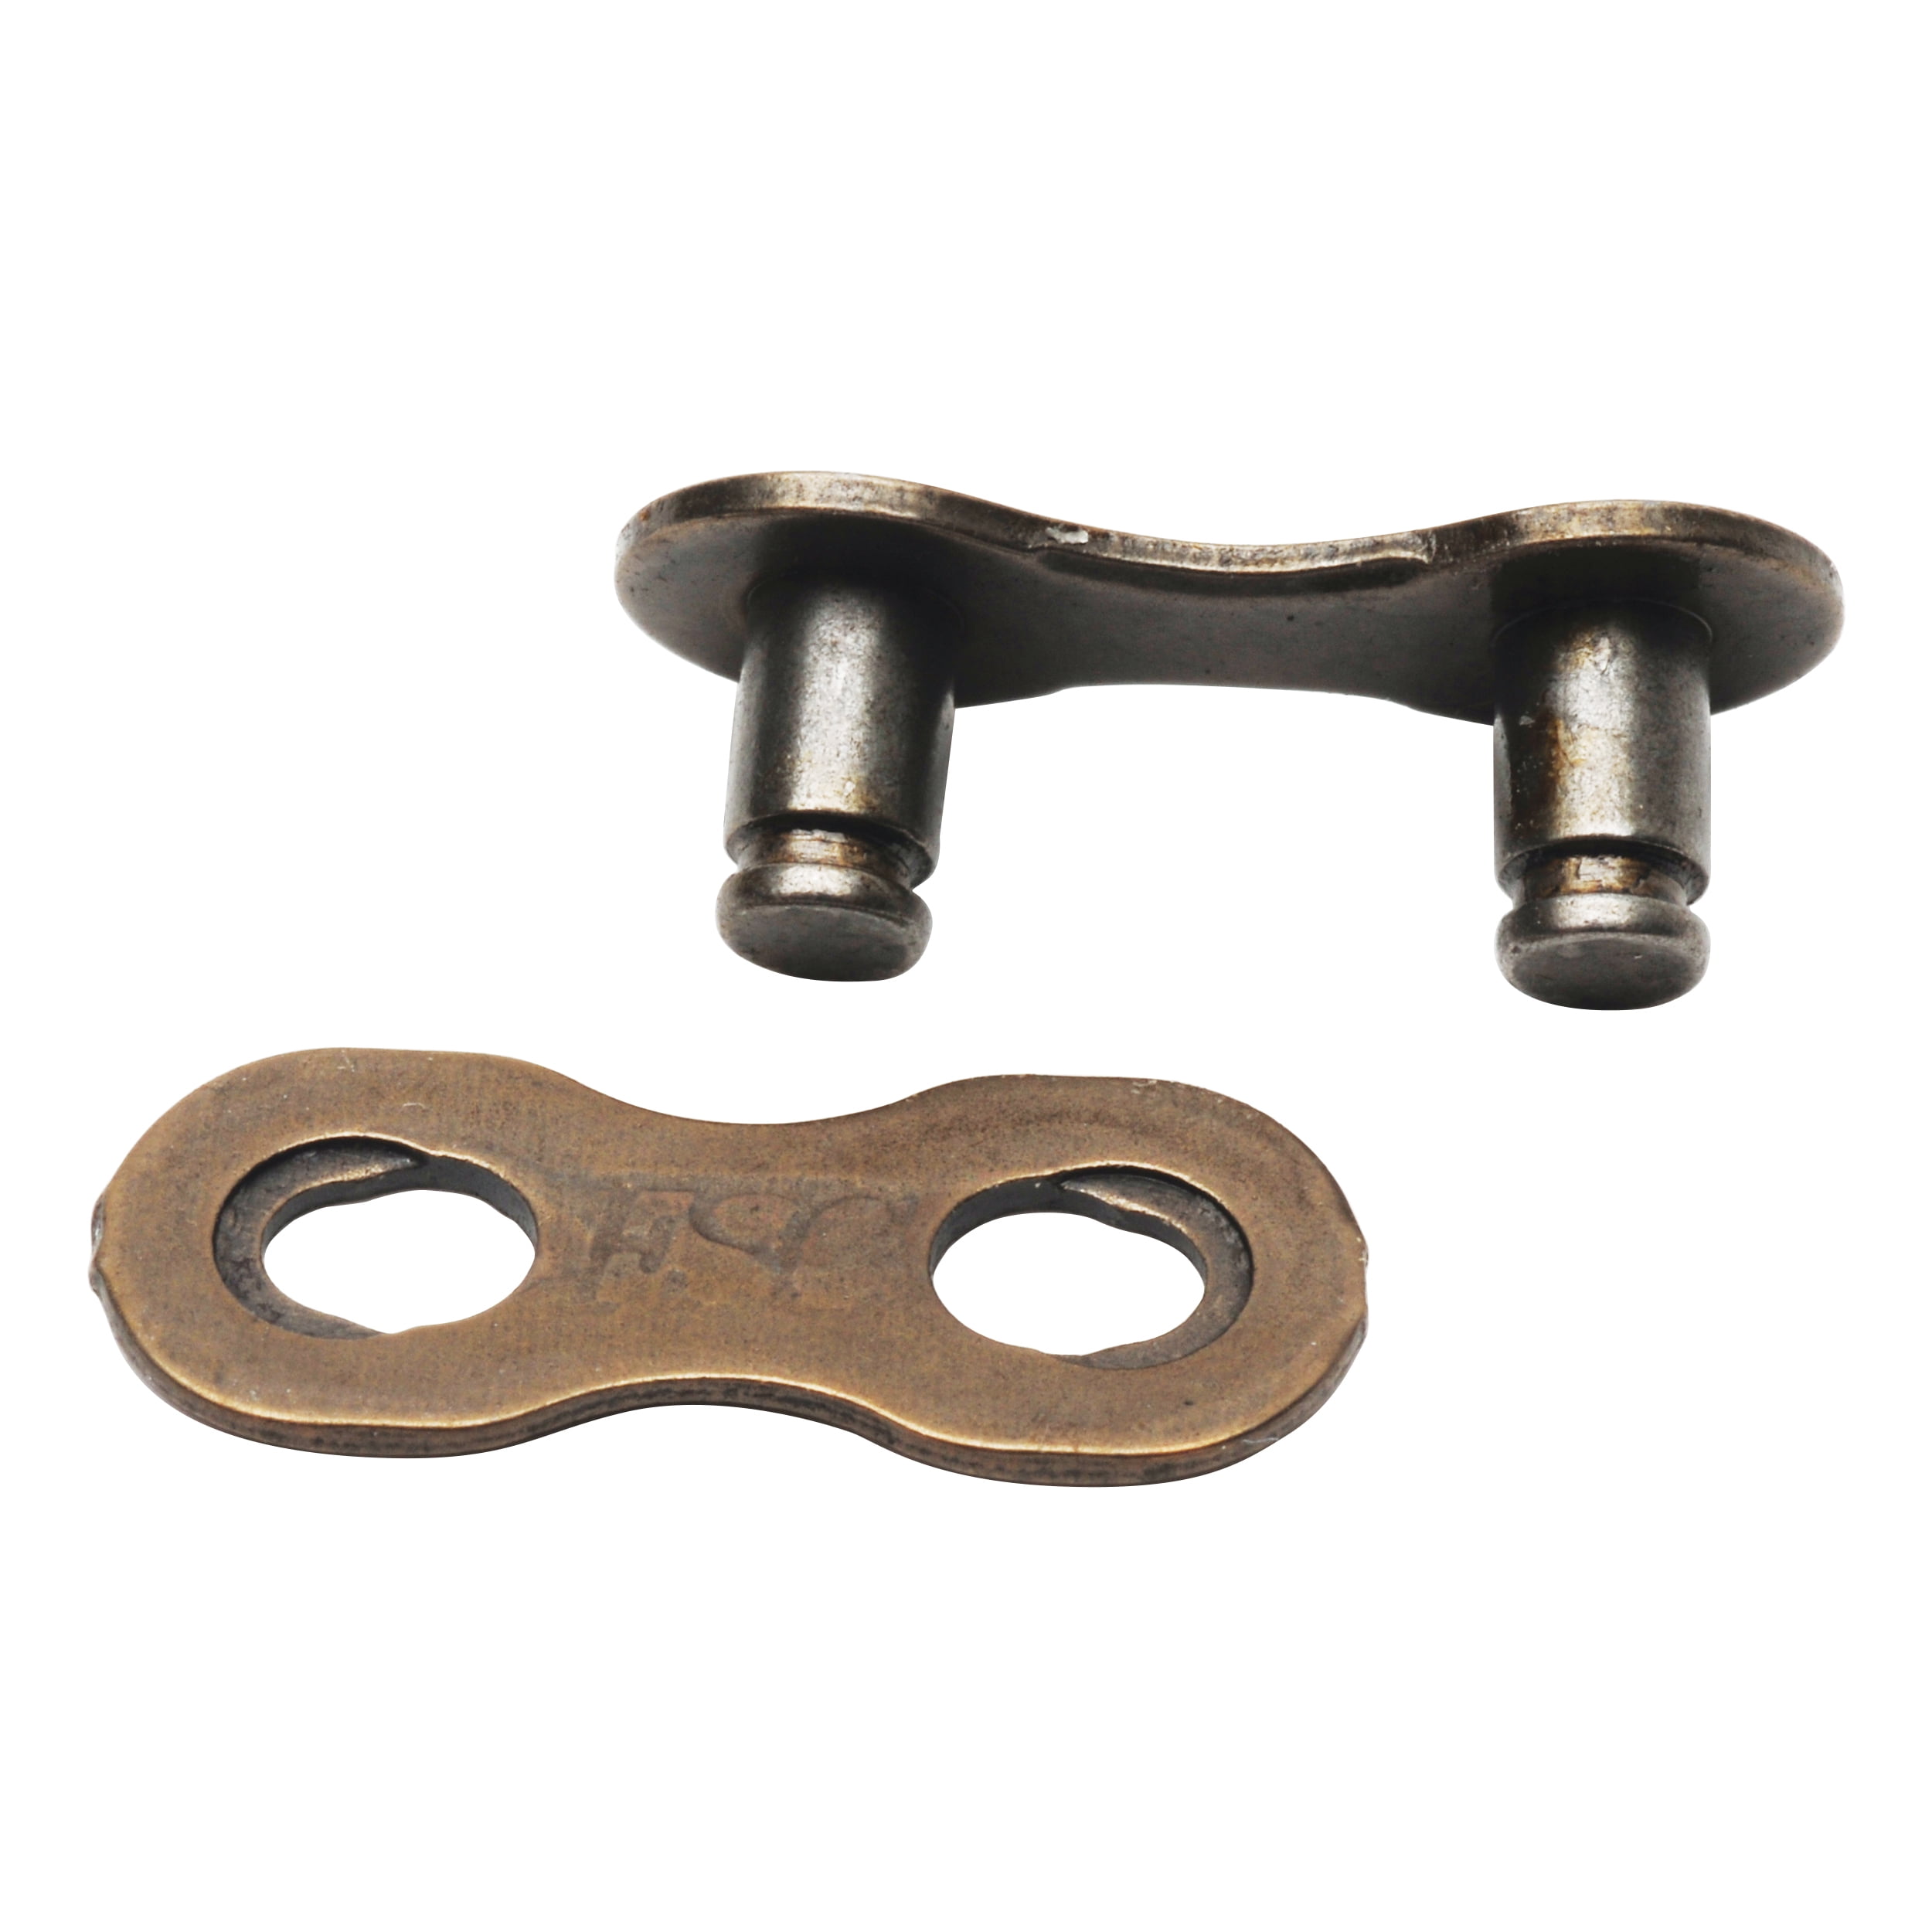 Details about    1/2" X 1/8" Bicycle Chain Connecting Link Master Link Pack of 5 Black Bronze 